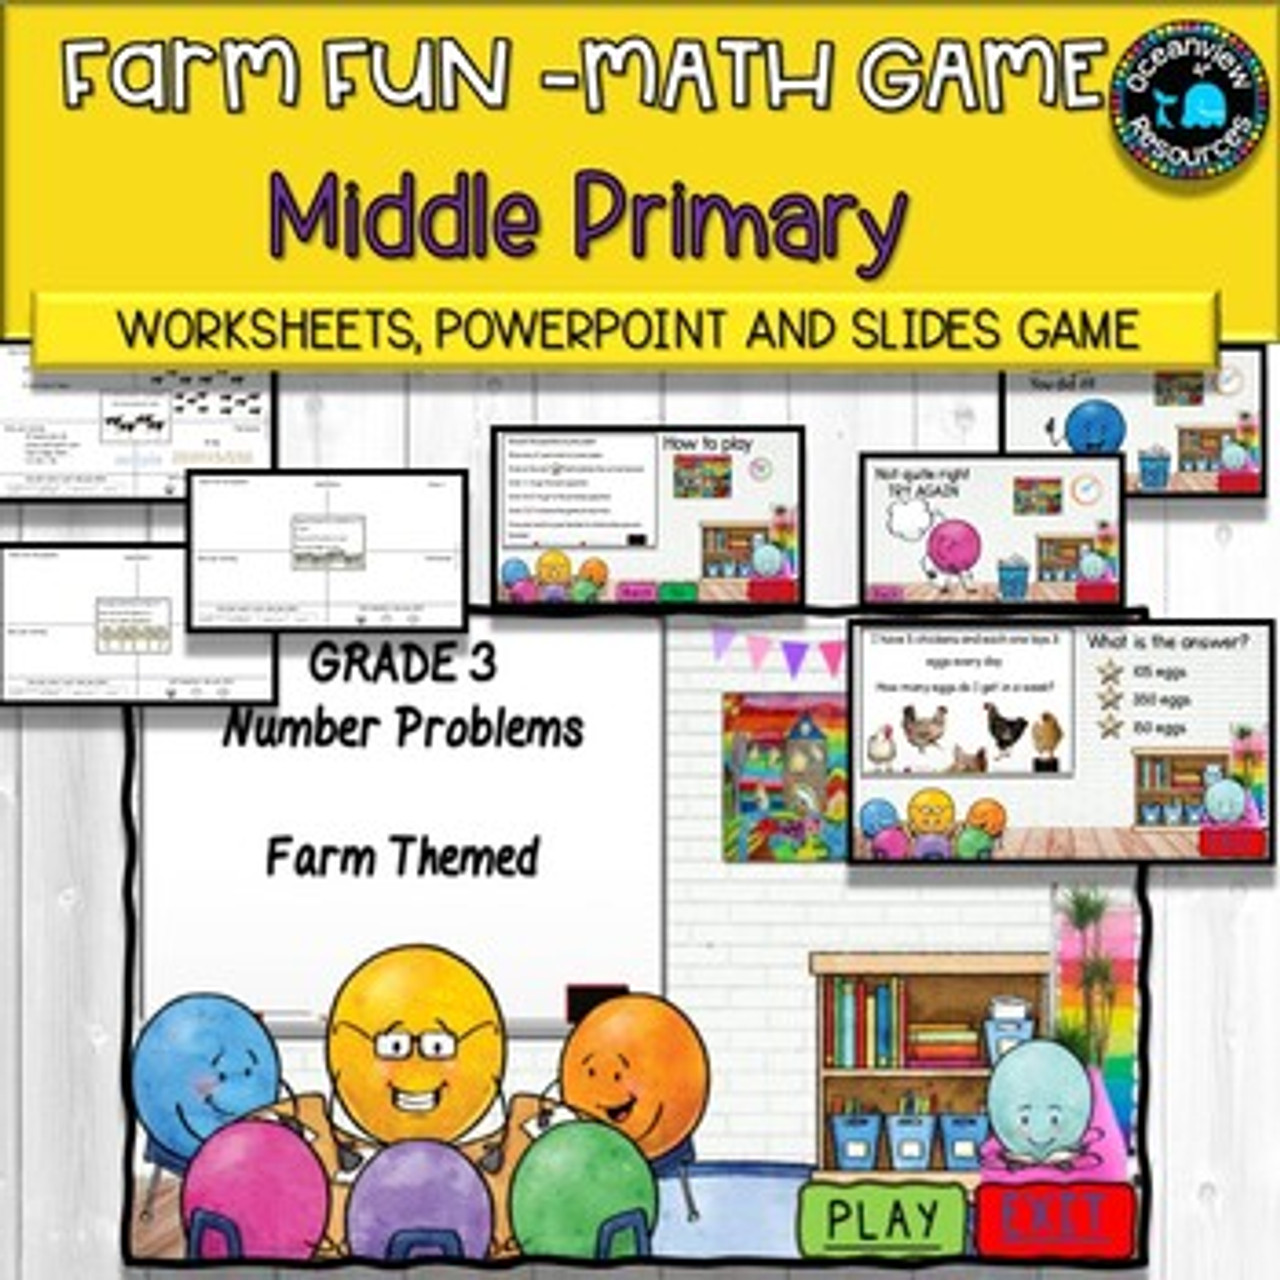 Farm Math Problems for Middle Primary students-Powerpoint game and worksheets